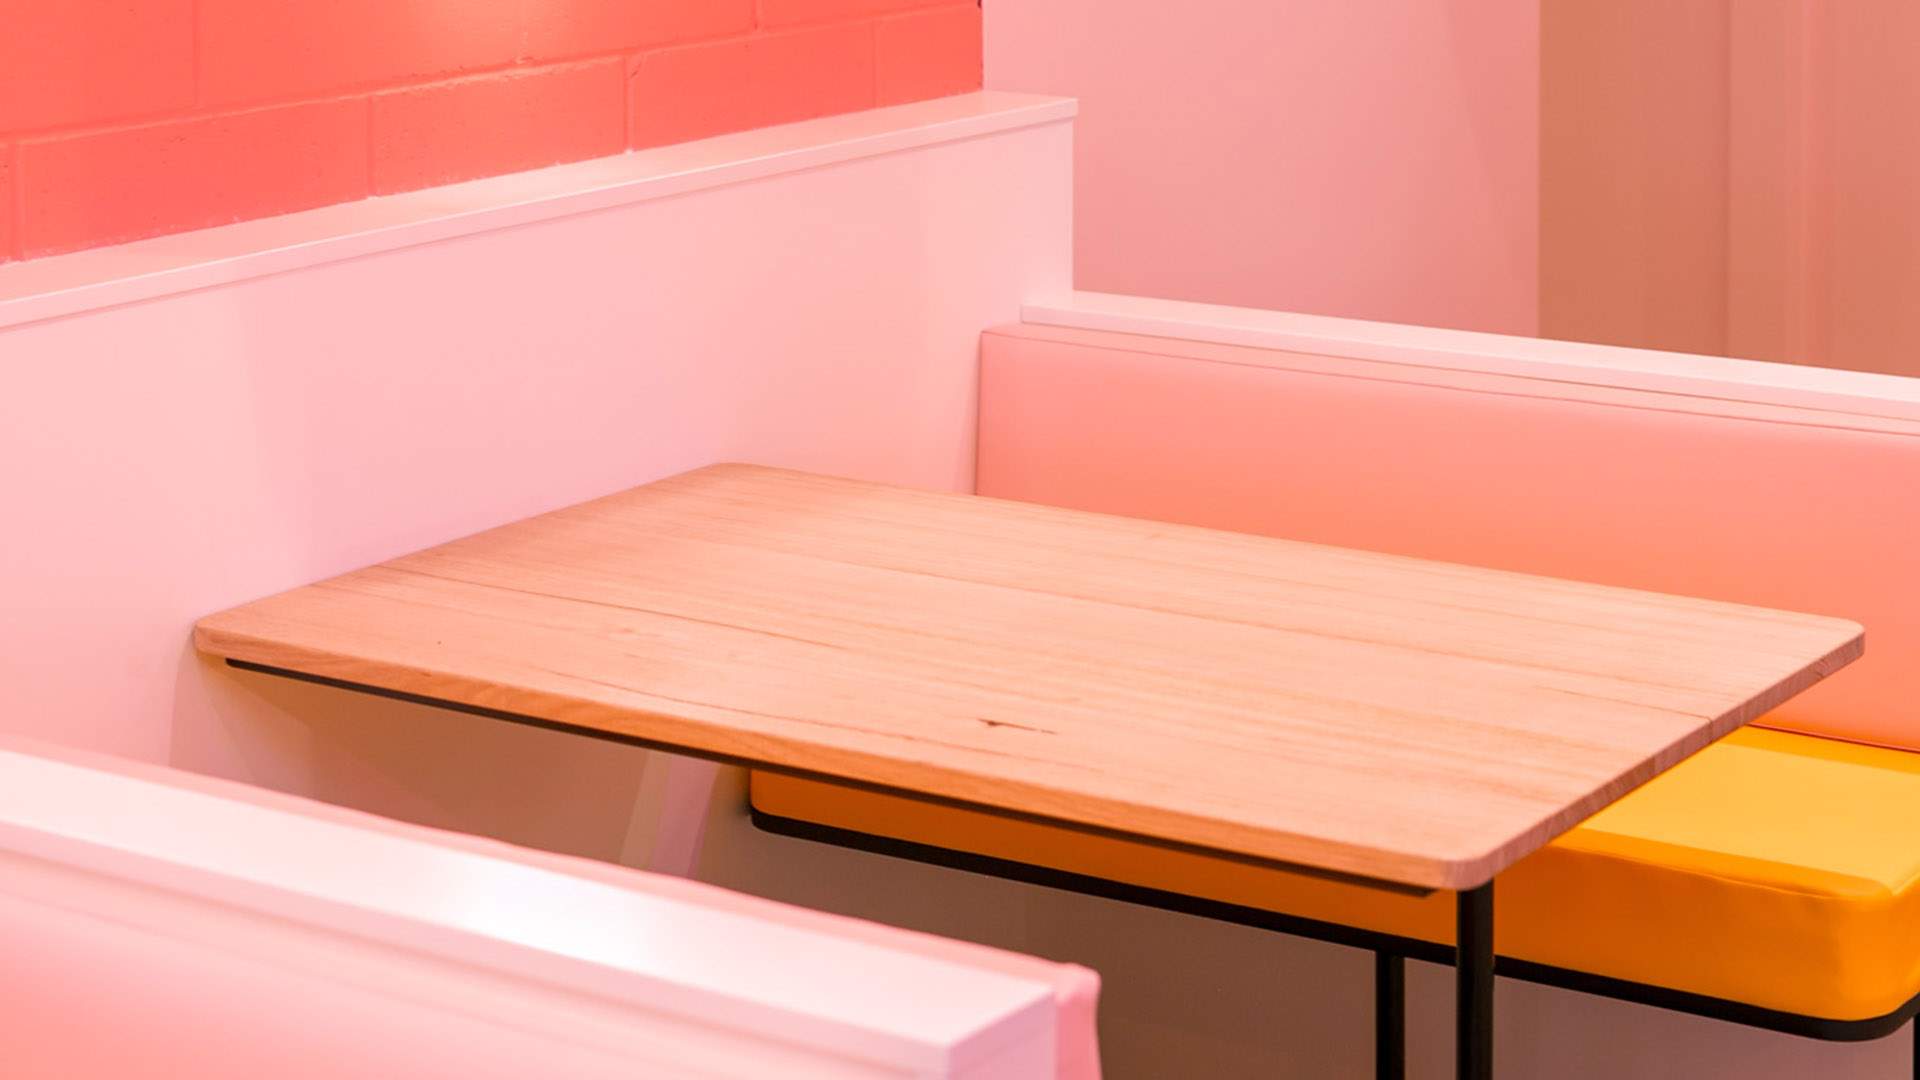 Superthing Is West End's New Pastel-Hued Croissanterie, Bakery and Cafe